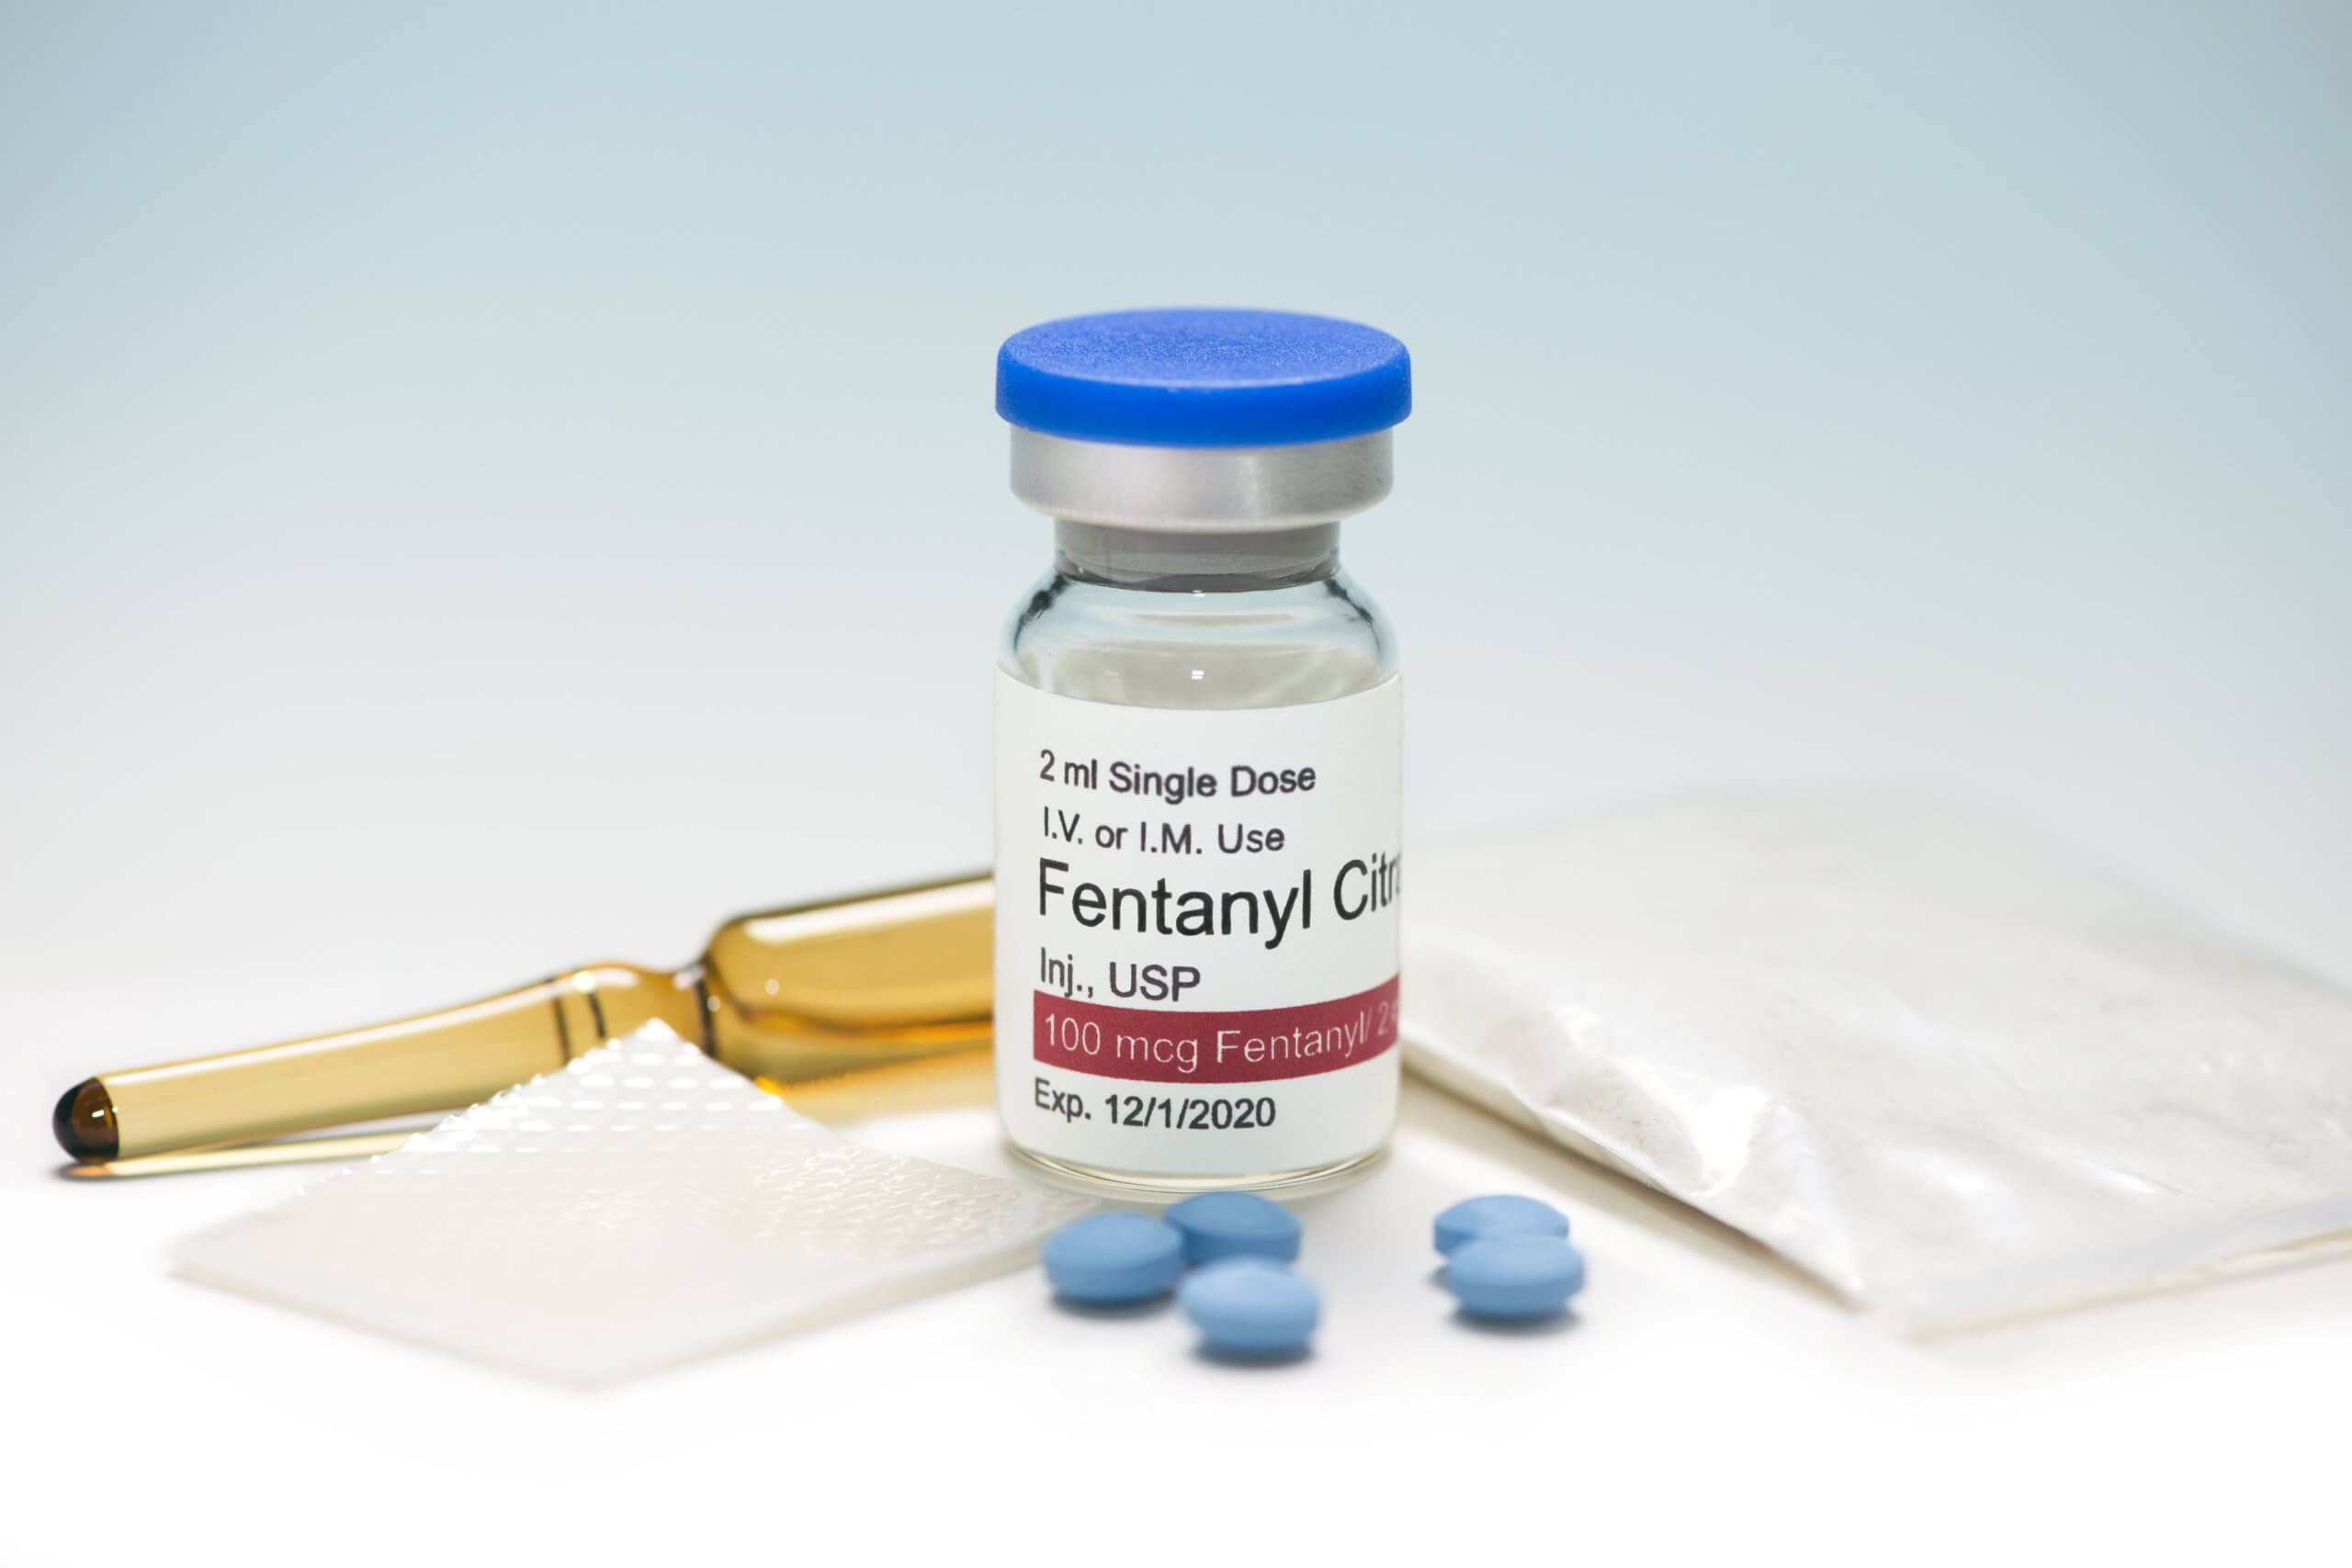 What Is Fentanyl and Why Is It Dangerous?